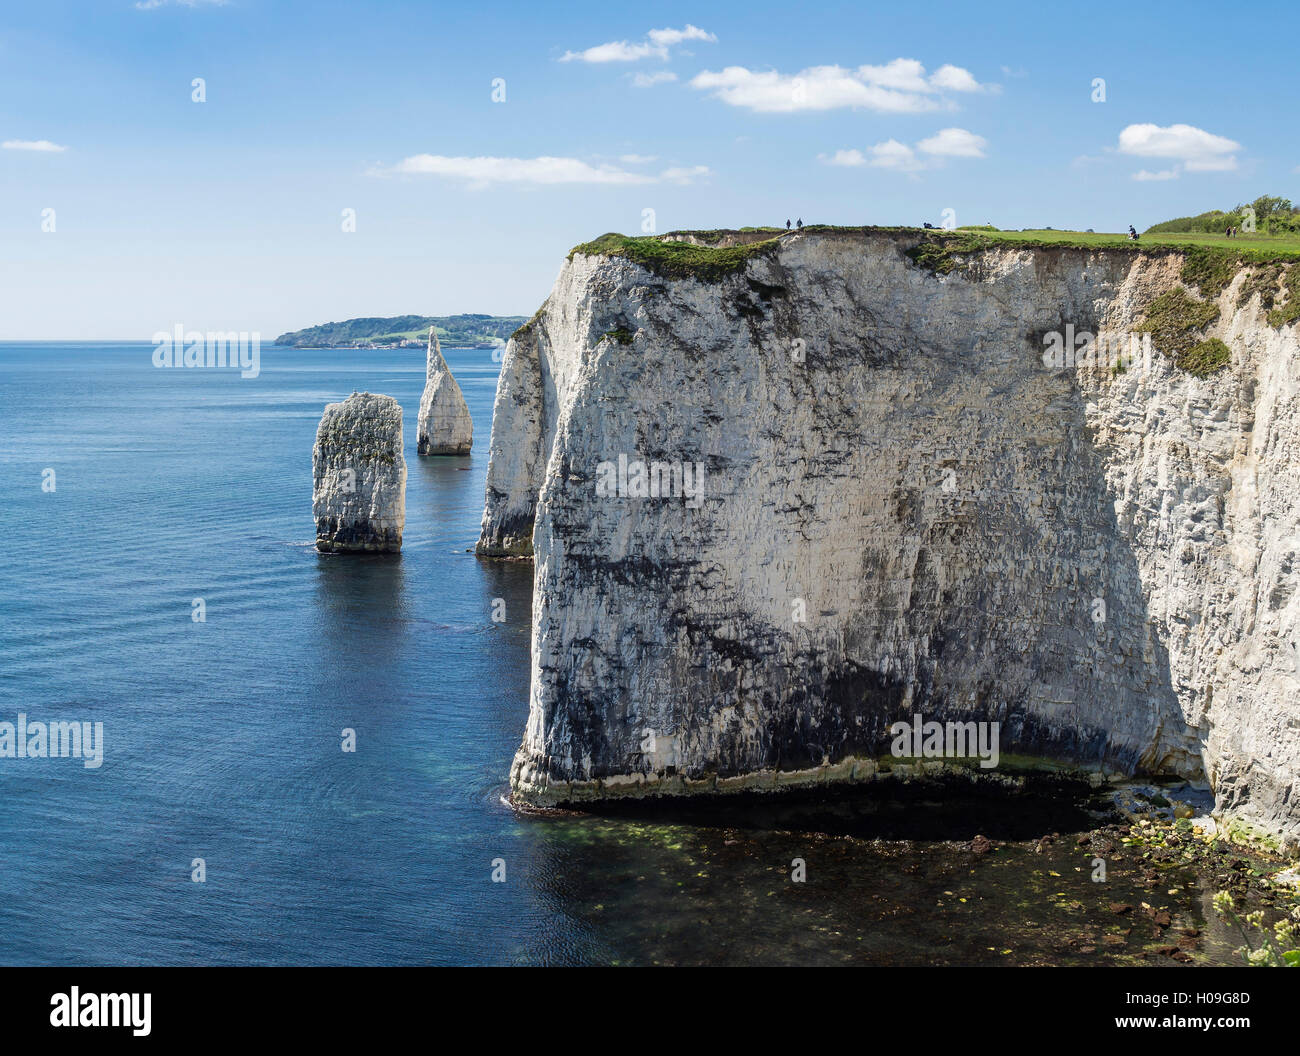 The Chalk cliffs of Ballard Down with The Pinnacles Stack, Swanage Bay, Isle of Purbeck, Jurassic Coast, UNESCO, Dorset, UK Stock Photo